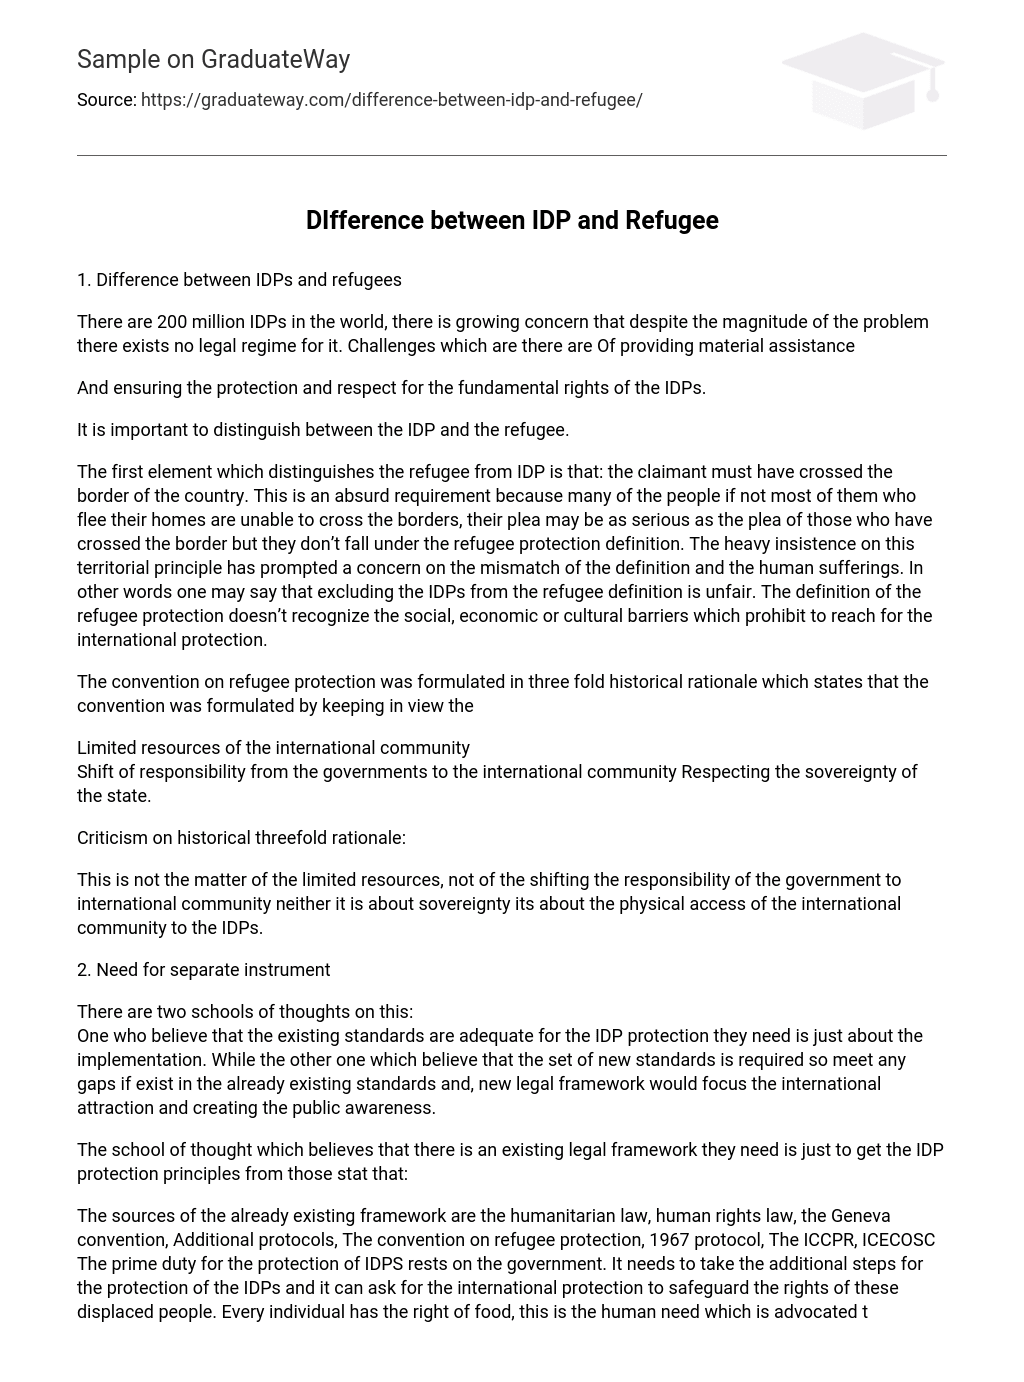 DIfference between IDP and Refugee